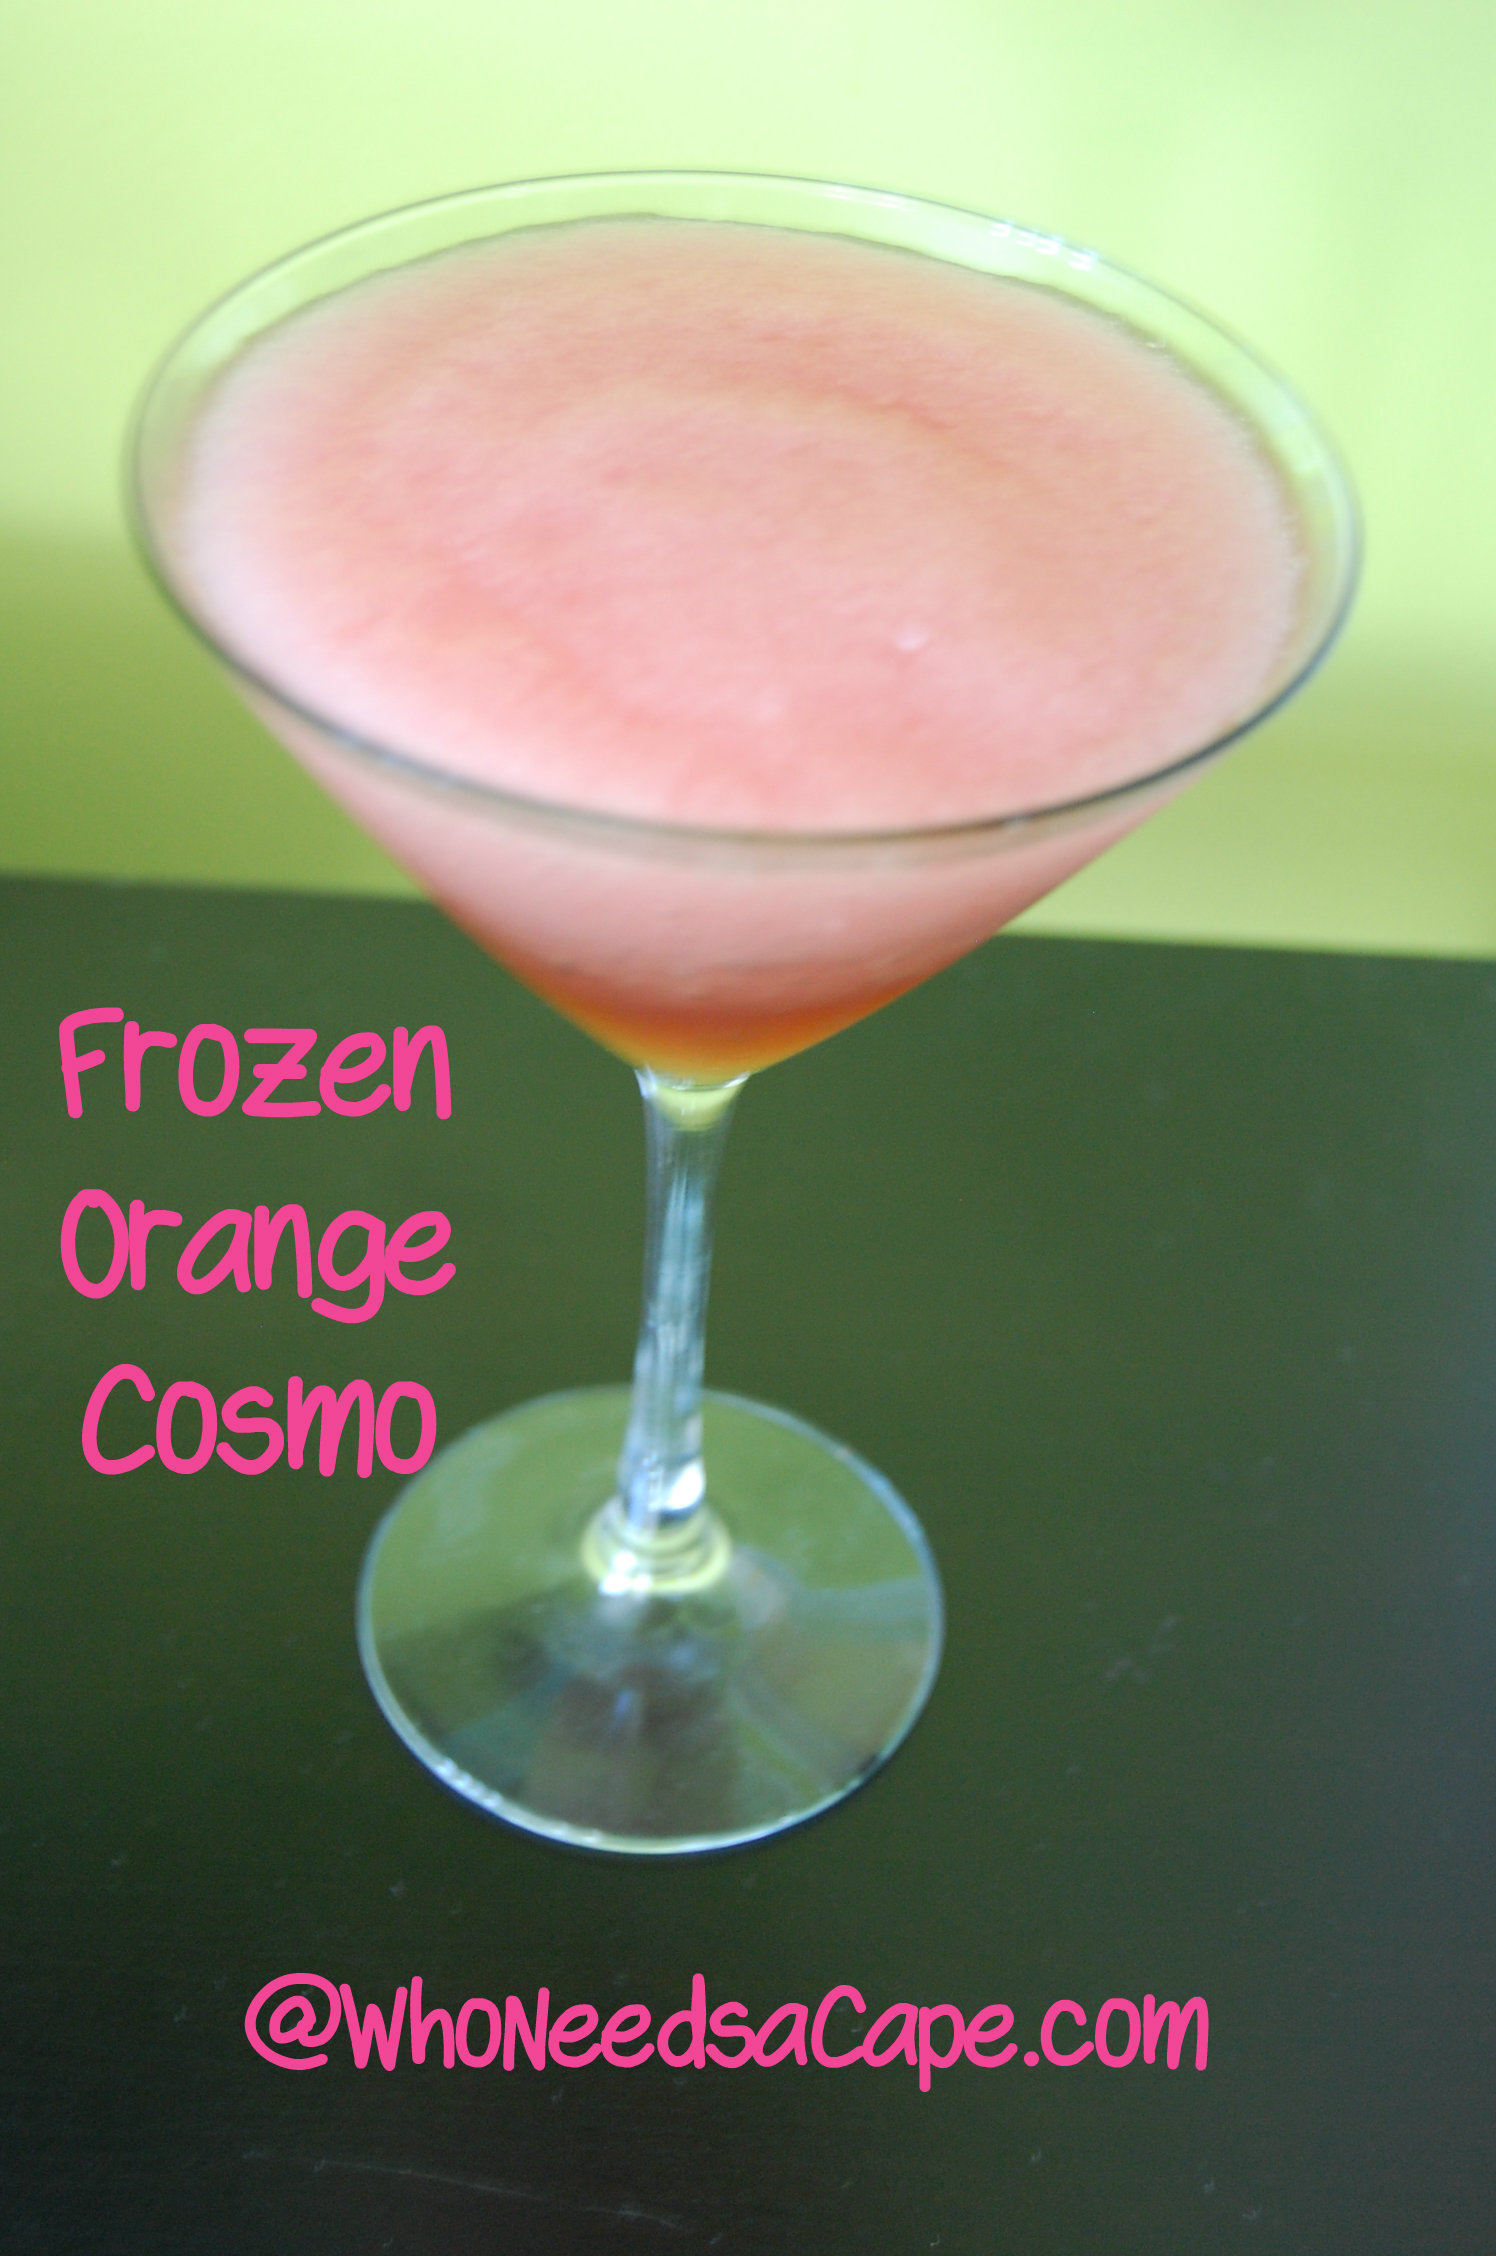 Whether you are enjoying a warm summer day or just need a fun cocktail you simply must try a Frozen Orange Cosmo. The perfect combination of flavors!